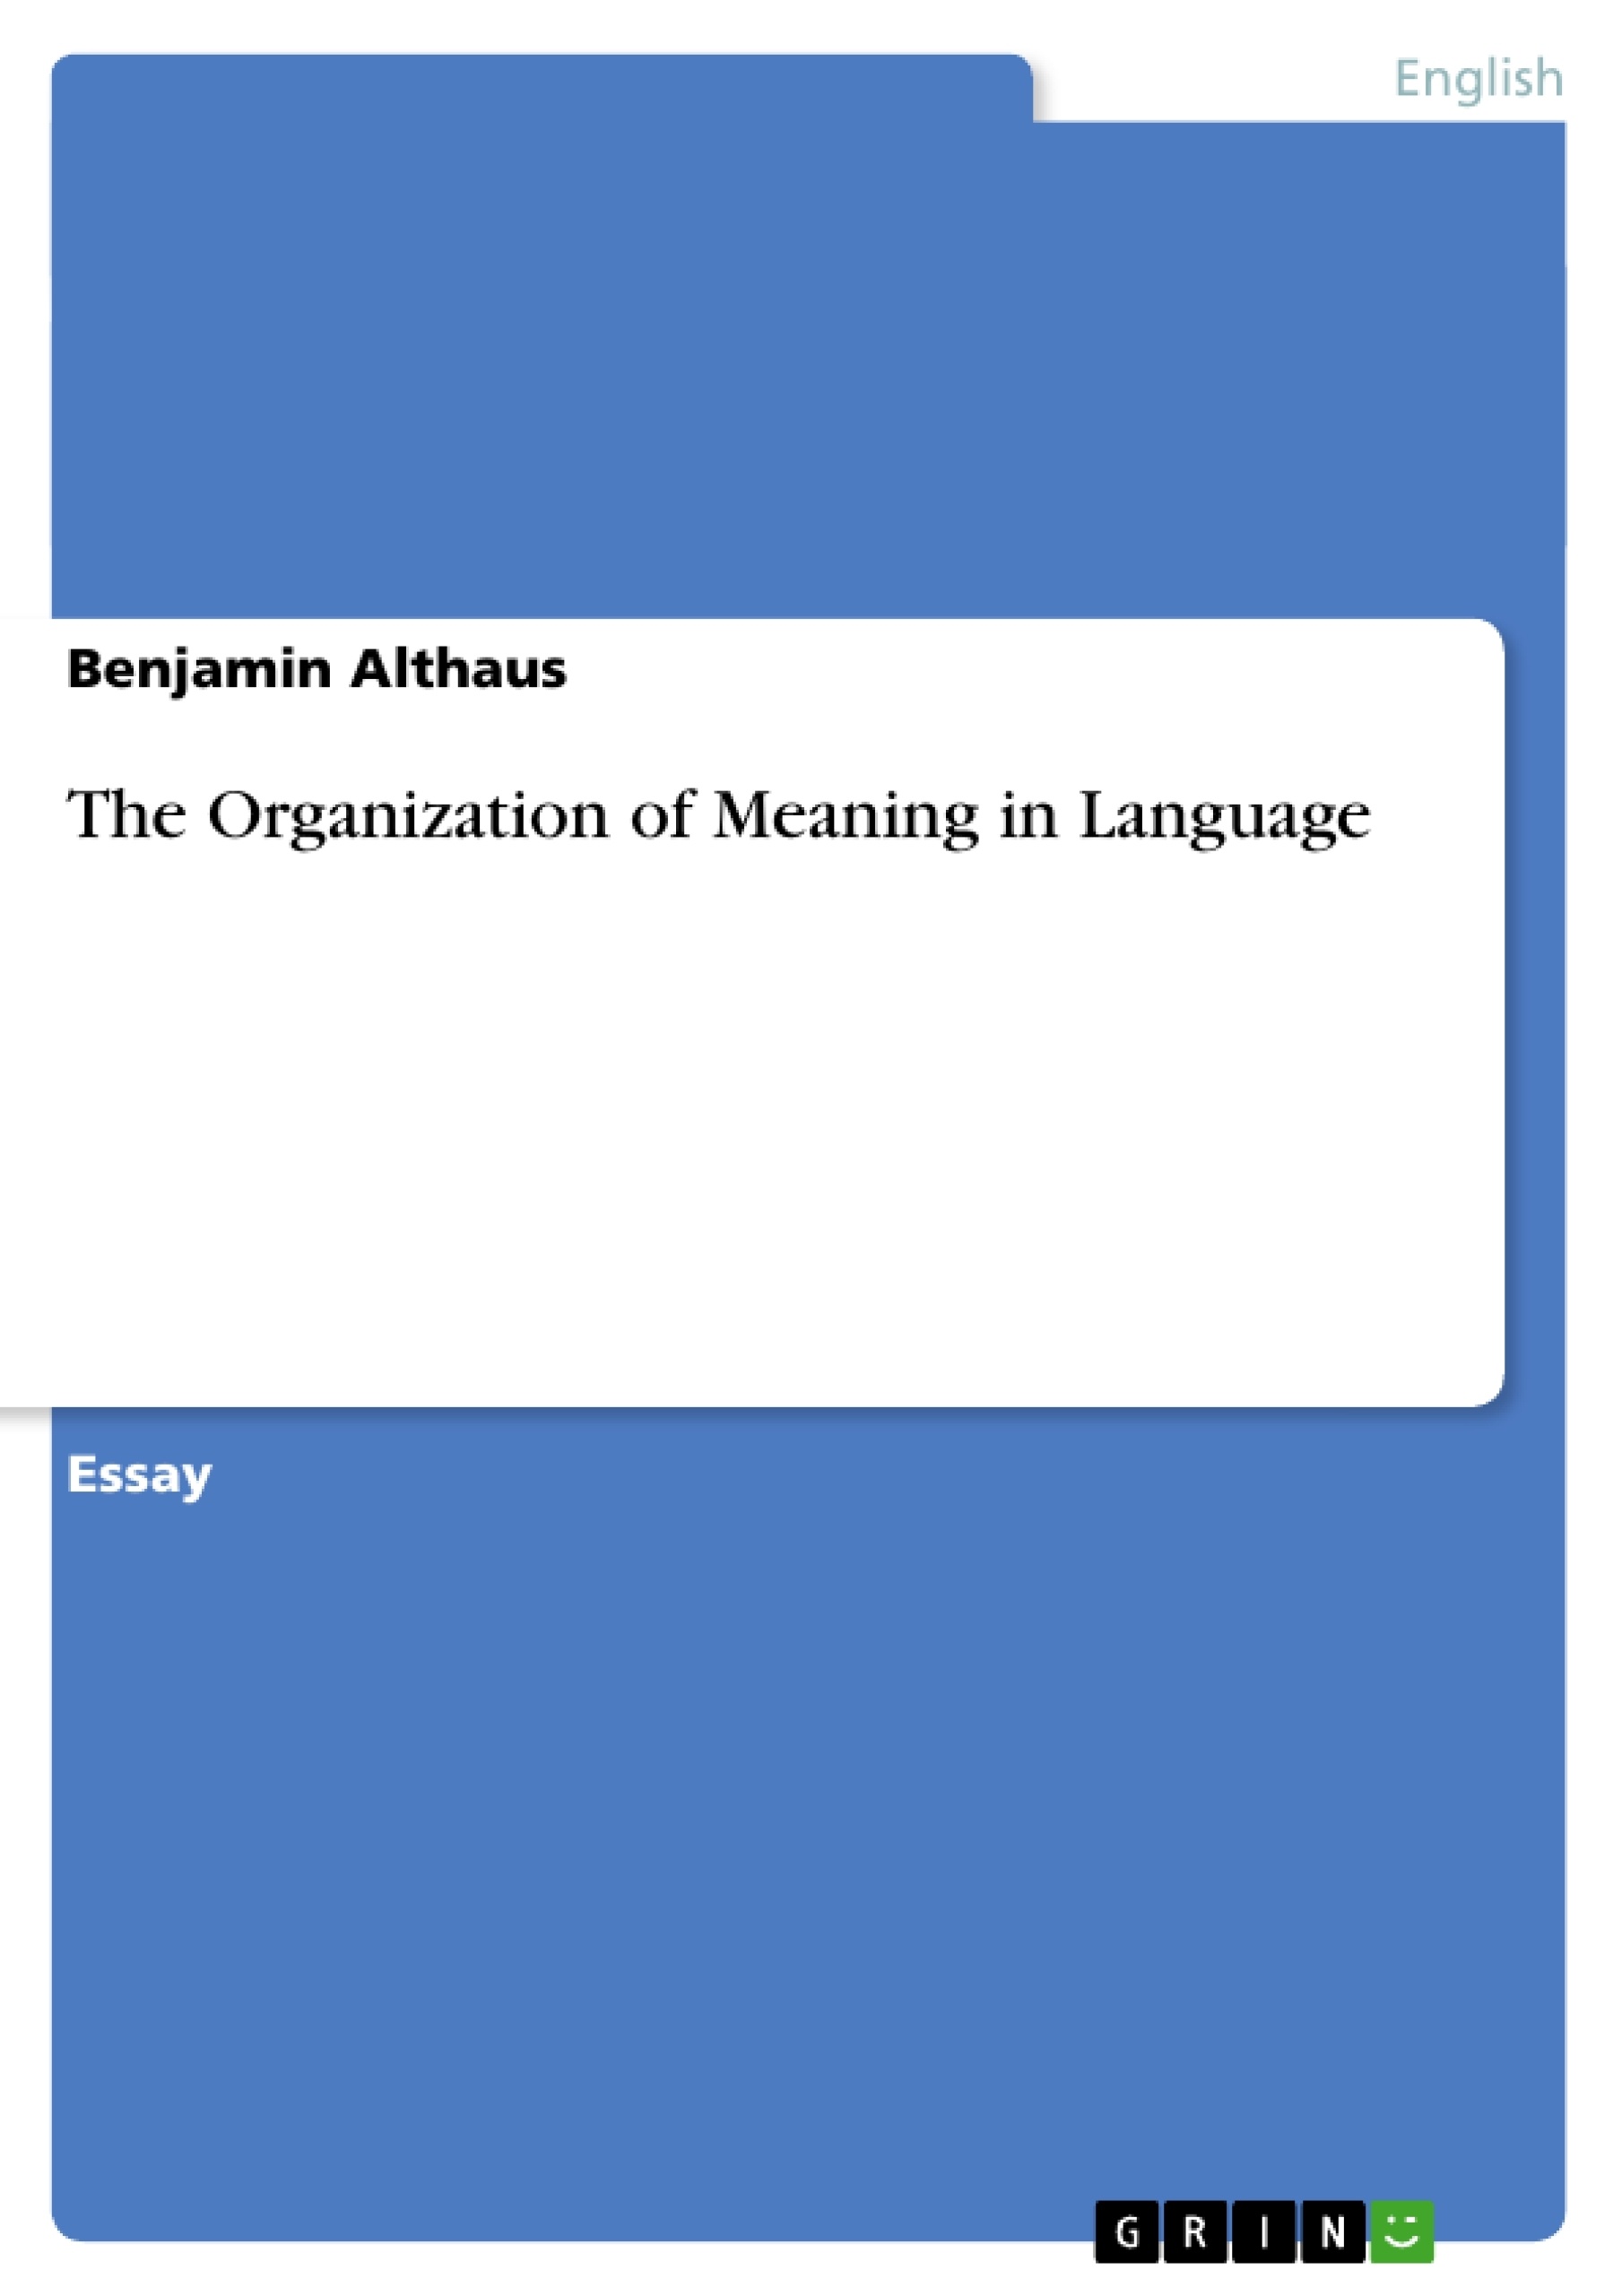 Title: The Organization of Meaning in Language